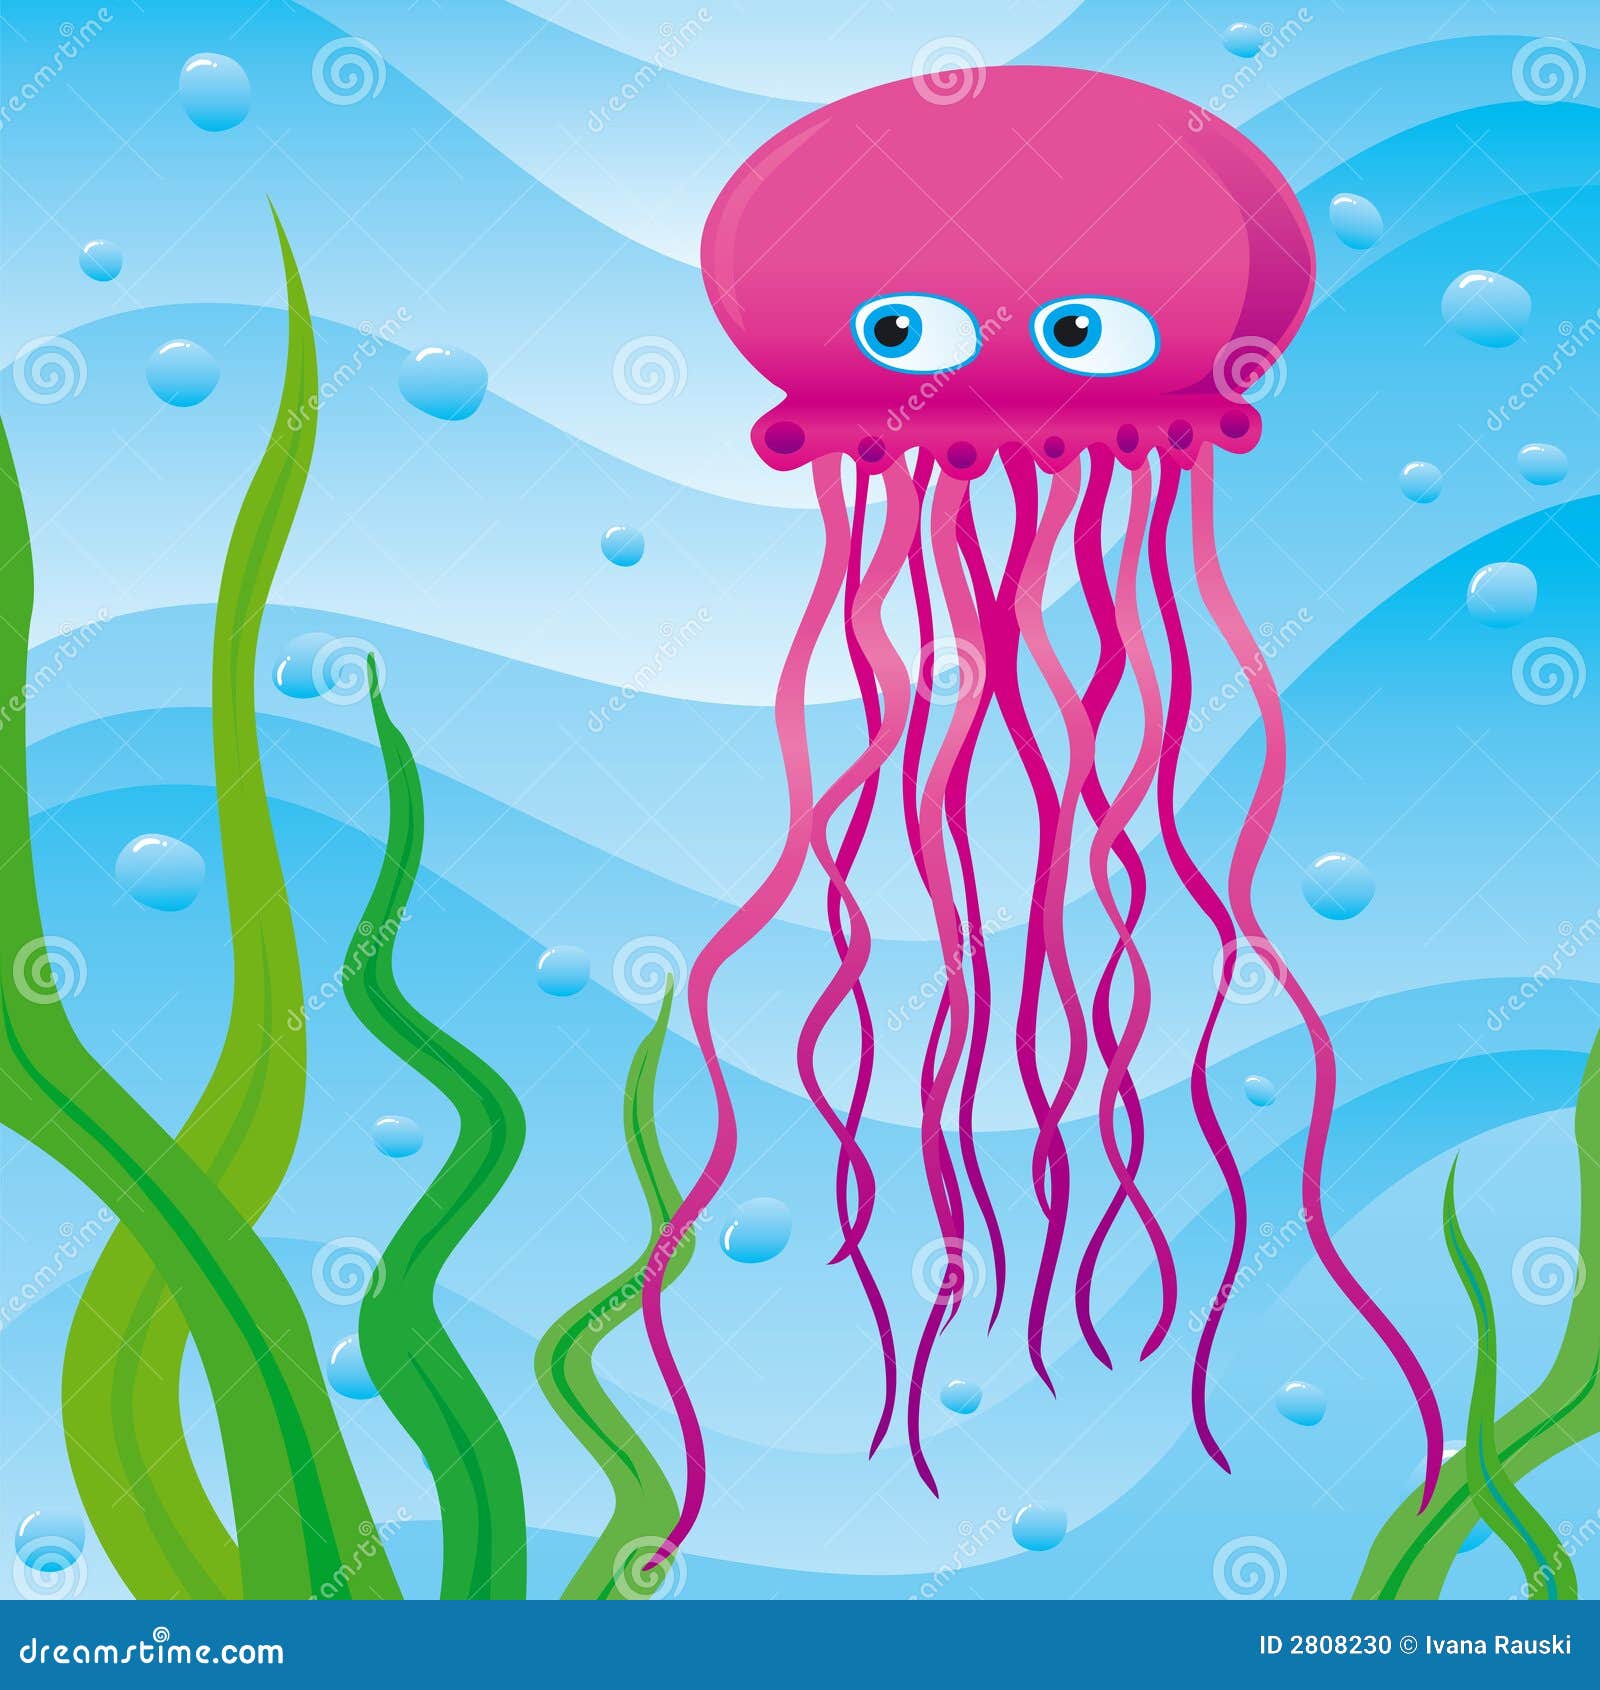 jellyfish clipart images - photo #47